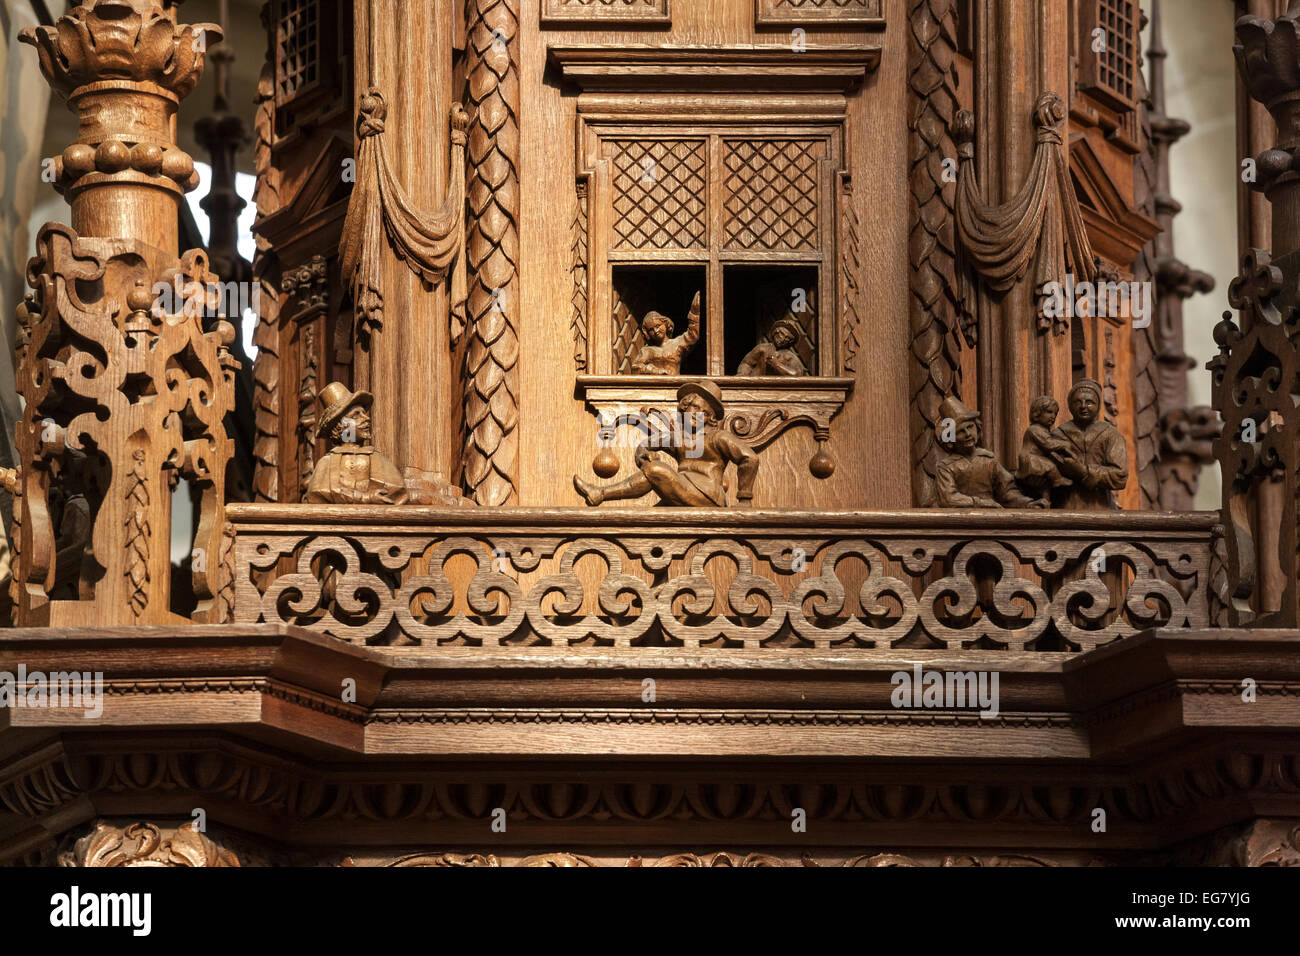 17th Century Woodcarvings on Pulpit with scenes of 17C daily life. Amsterdam De Nieuwe Kerk; The New Church interior. Stock Photo